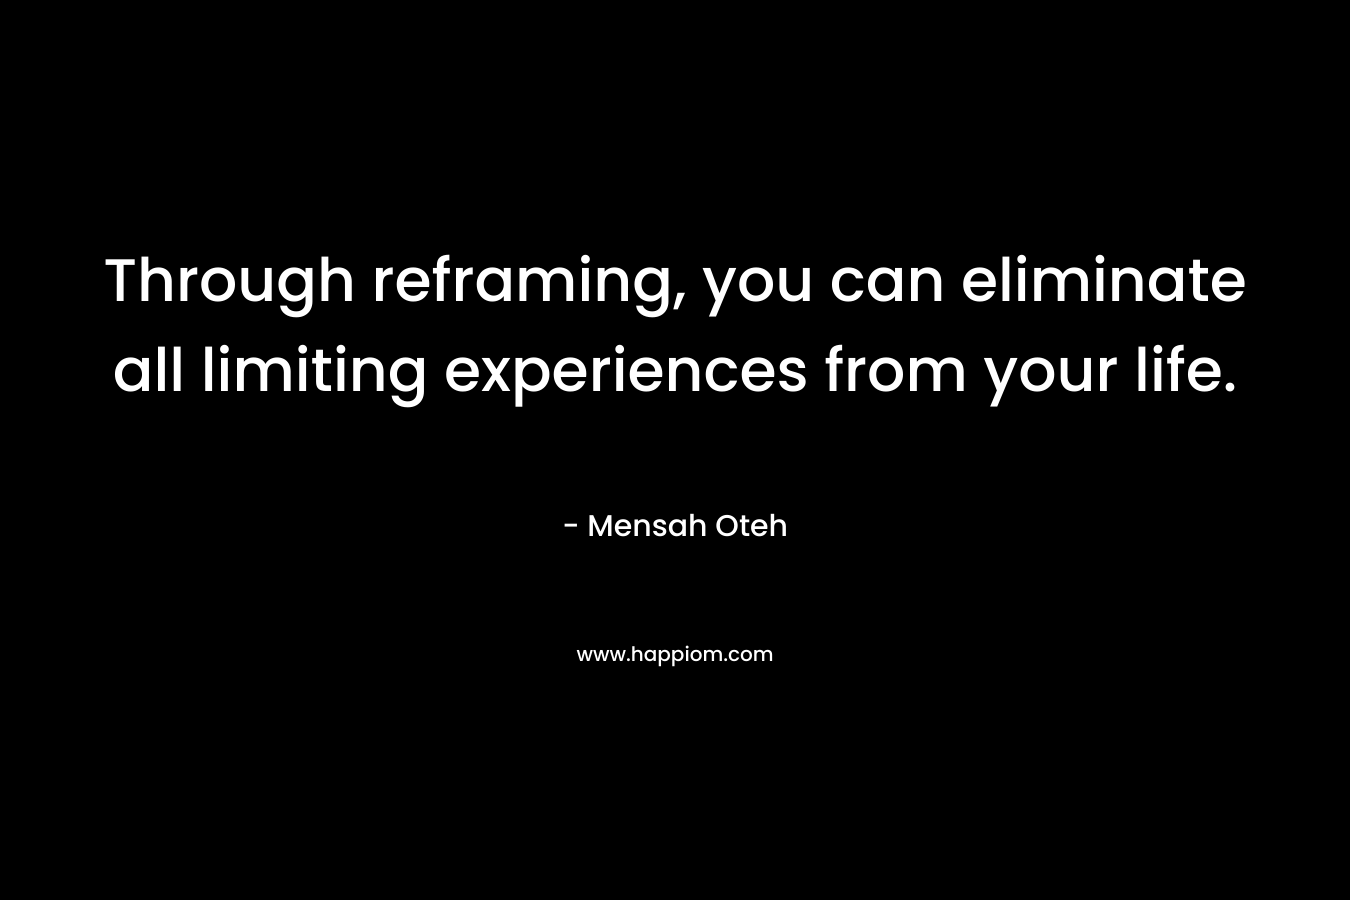 Through reframing, you can eliminate all limiting experiences from your life.